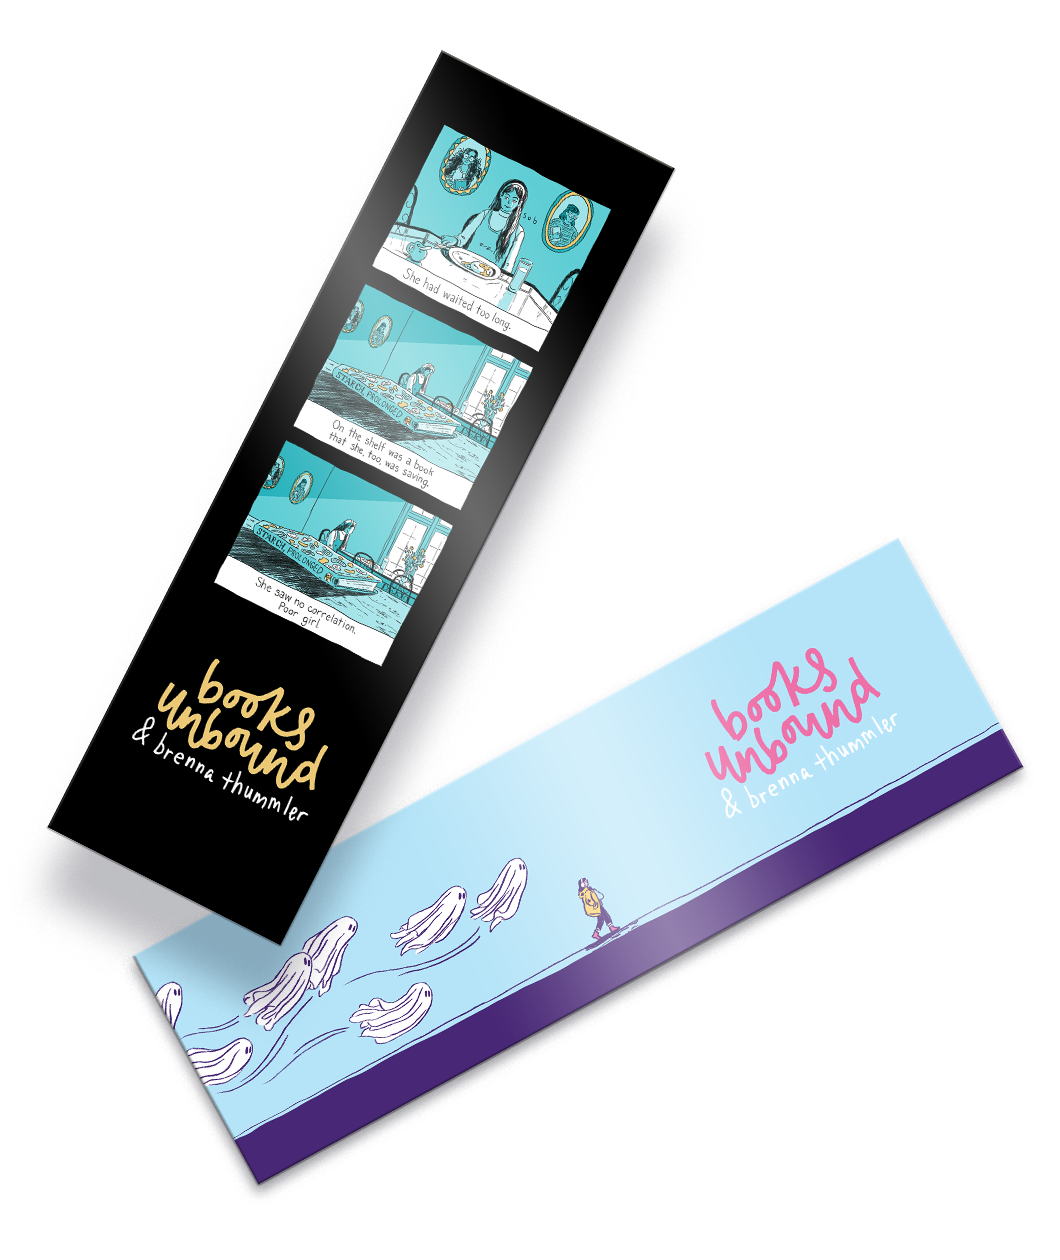 Two bookmarks, one with a blue tone comic strip design with a black background, and the other with a drawing of a girl being followed by ghosts against a light blue background - by Books Unbound.